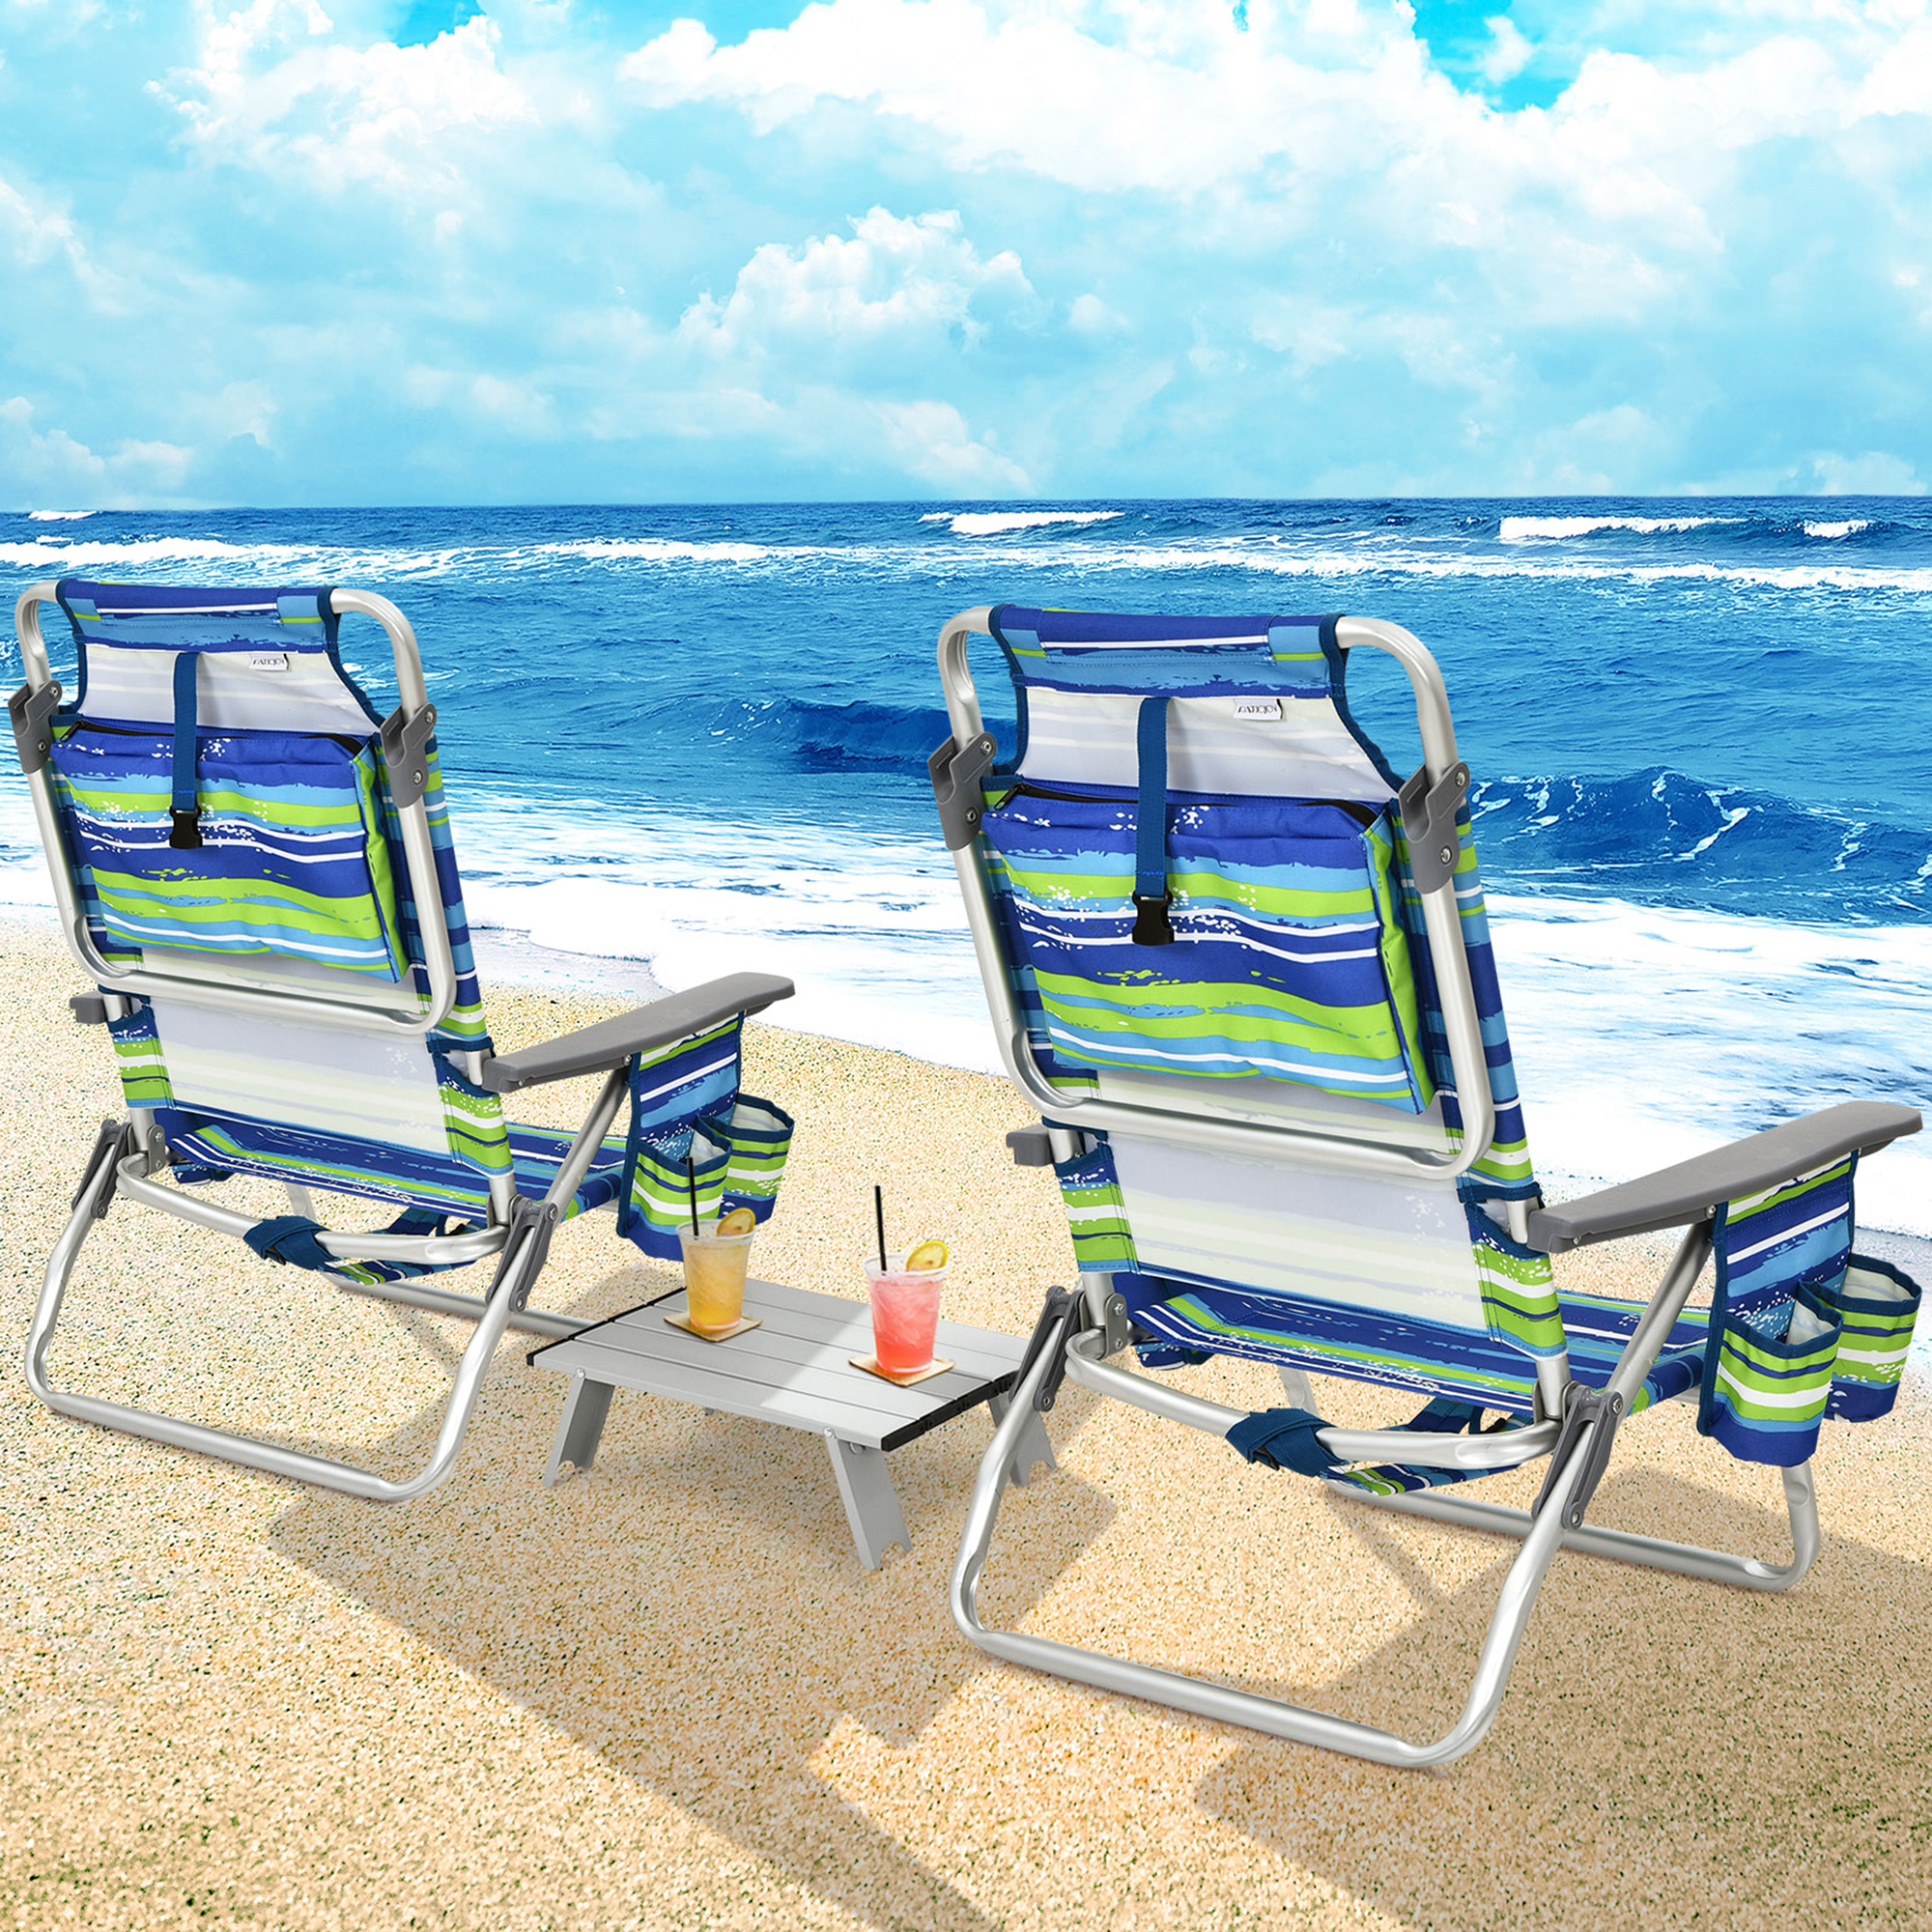 Gymax 3PCS Folding Beach Chair & Table Set Outdoor Adjustable Reclining Chair - image 4 of 10